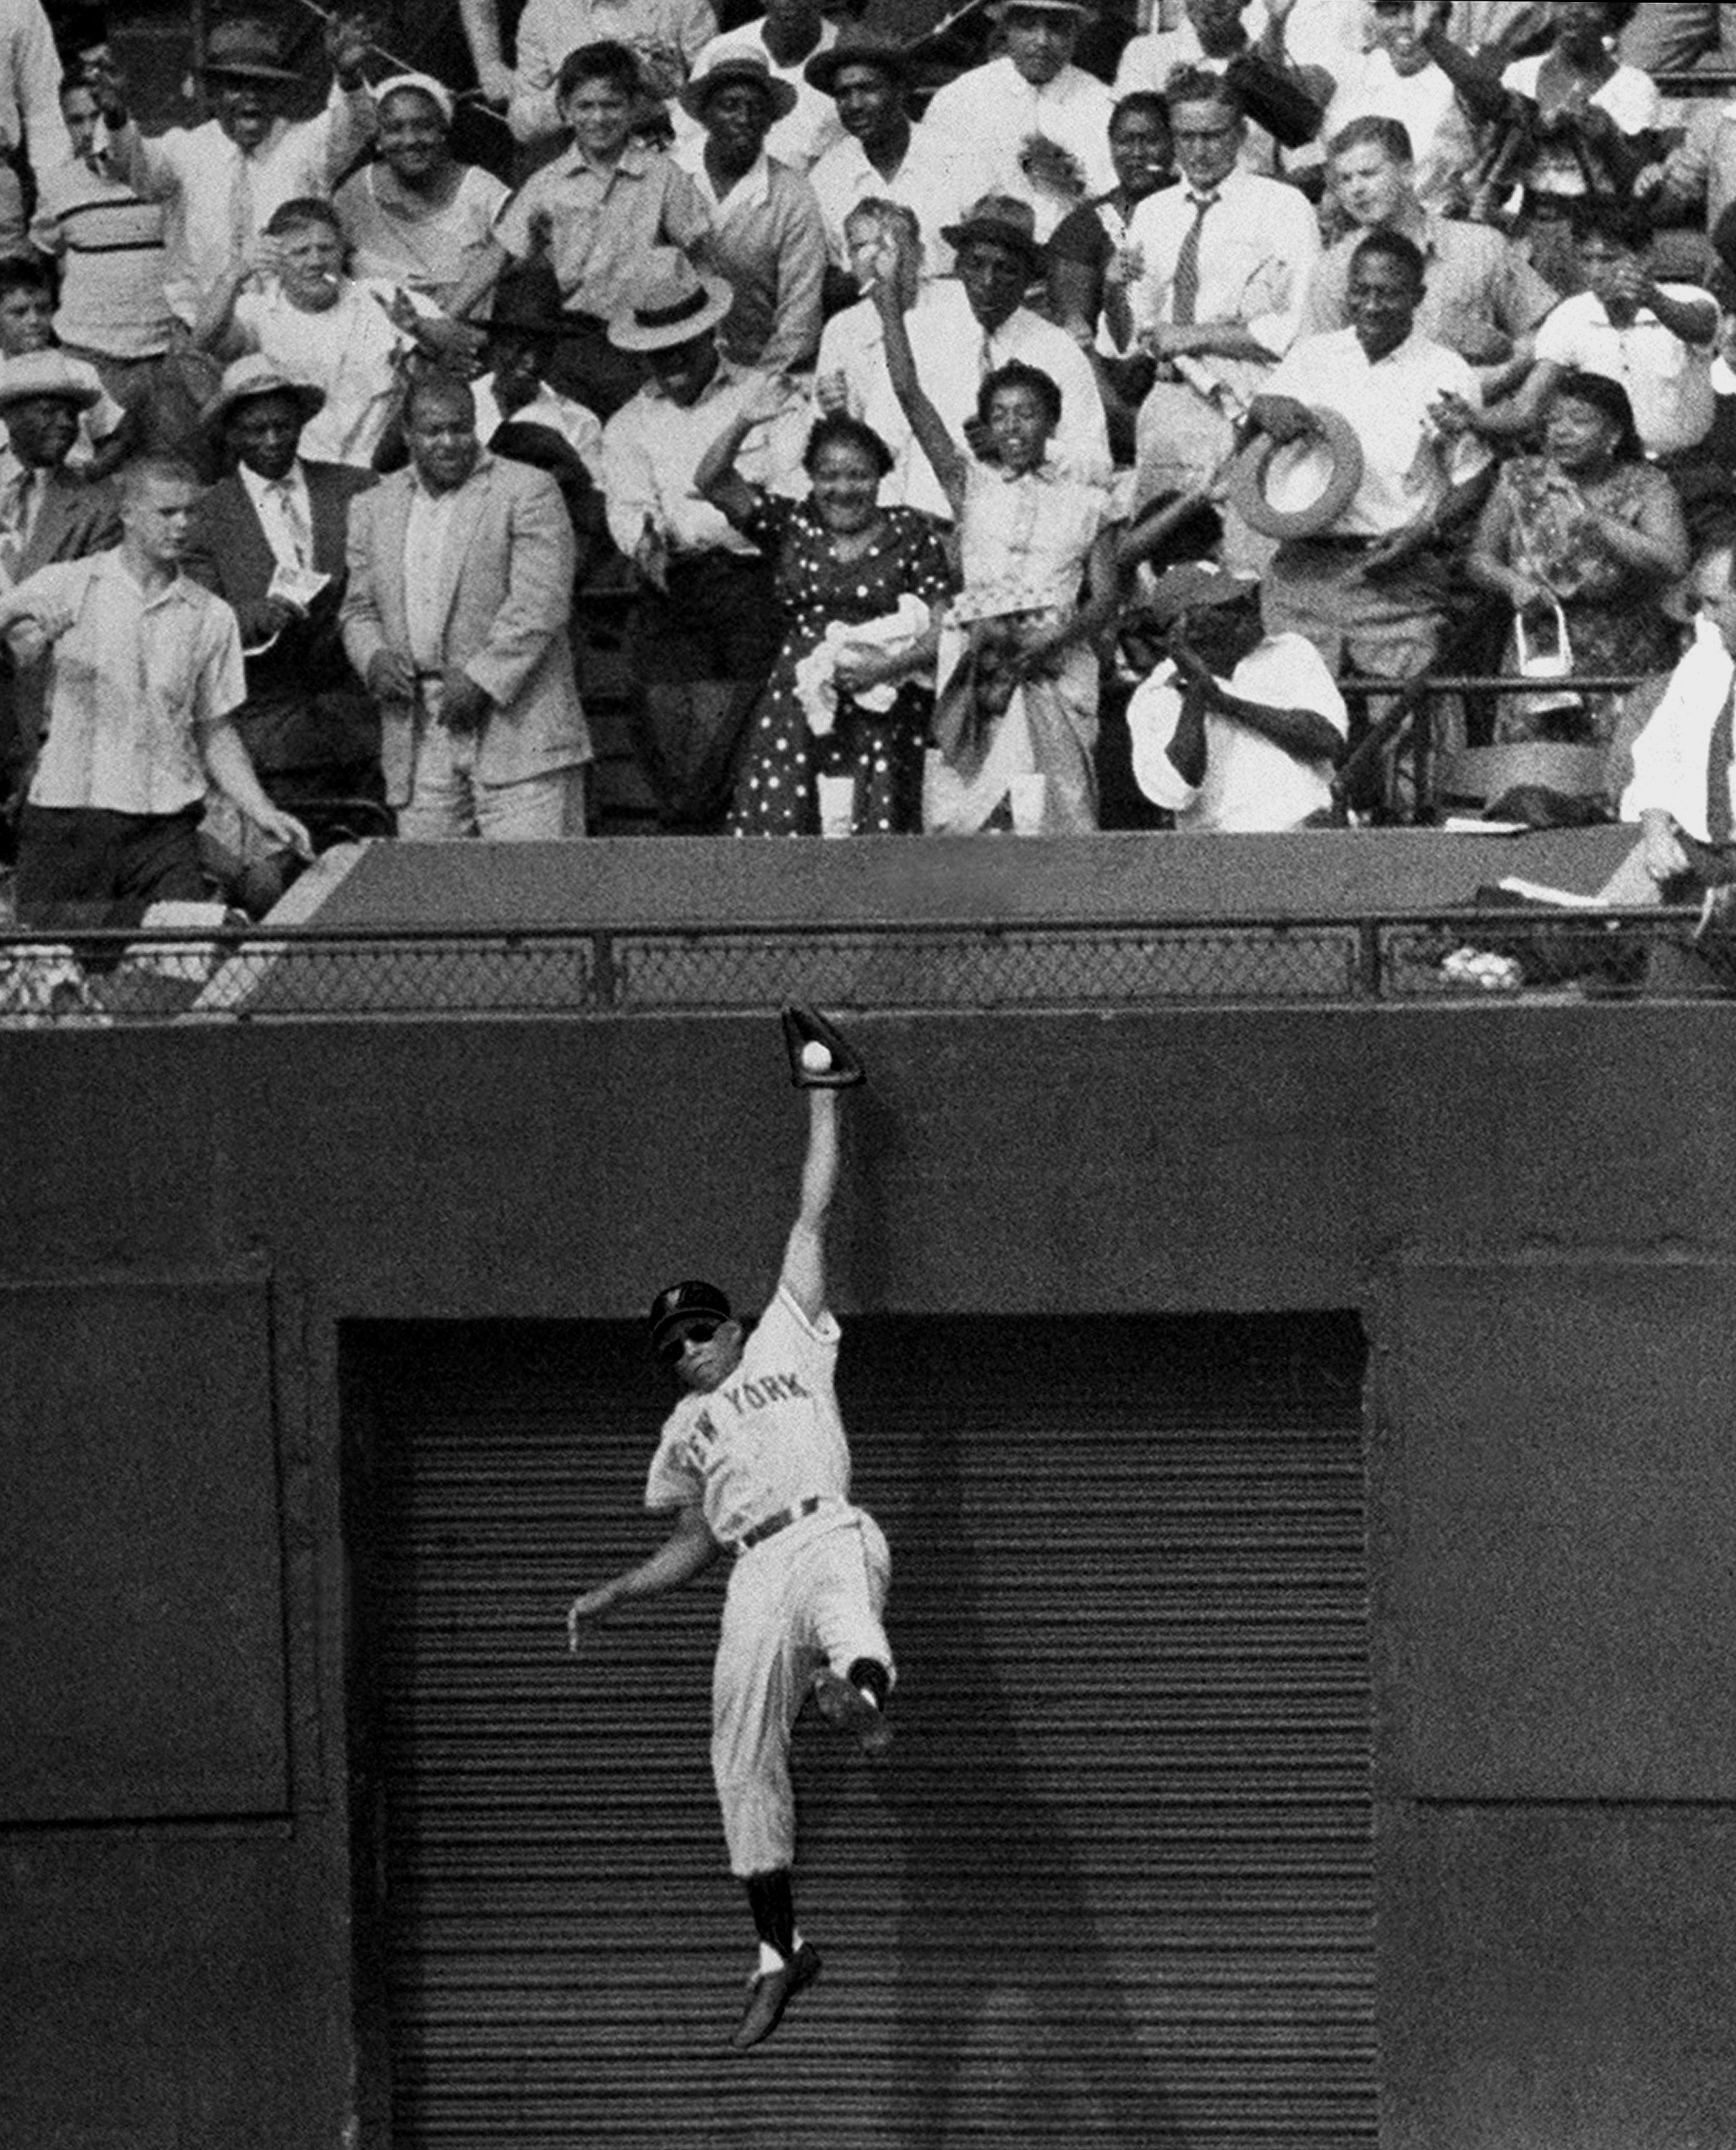 Willie Mays' famous one-hand catch in the 1954 World Series. | Source: Getty Images